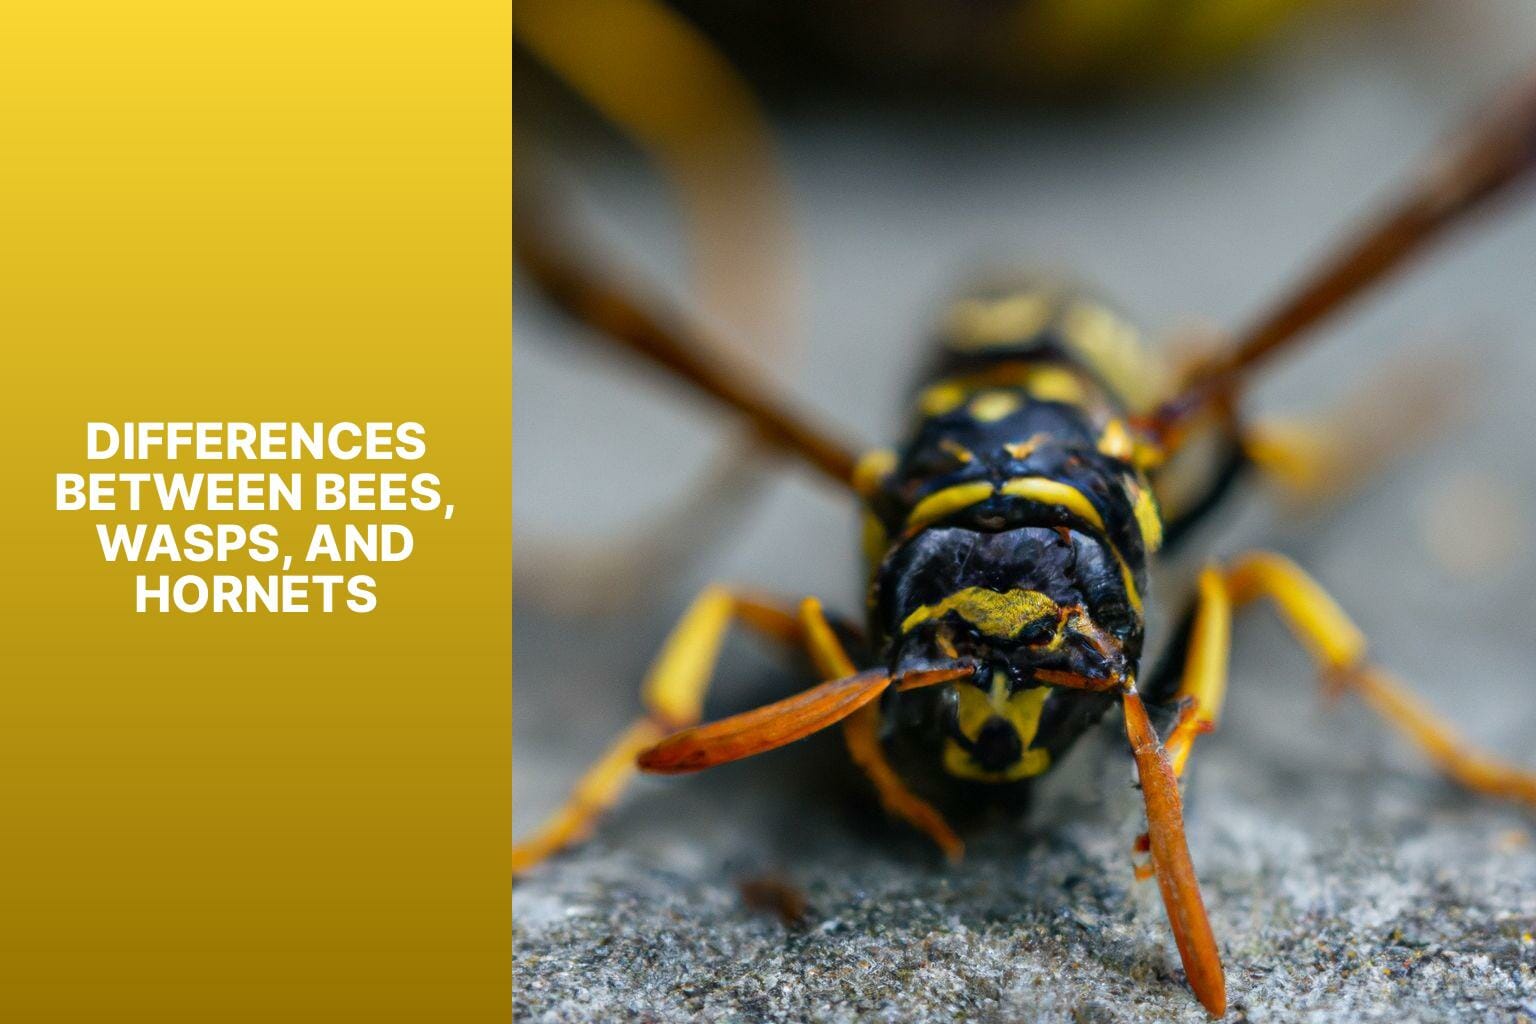 Differences Between Bees, Wasps, and Hornets - bees vs wasps vs hornets 